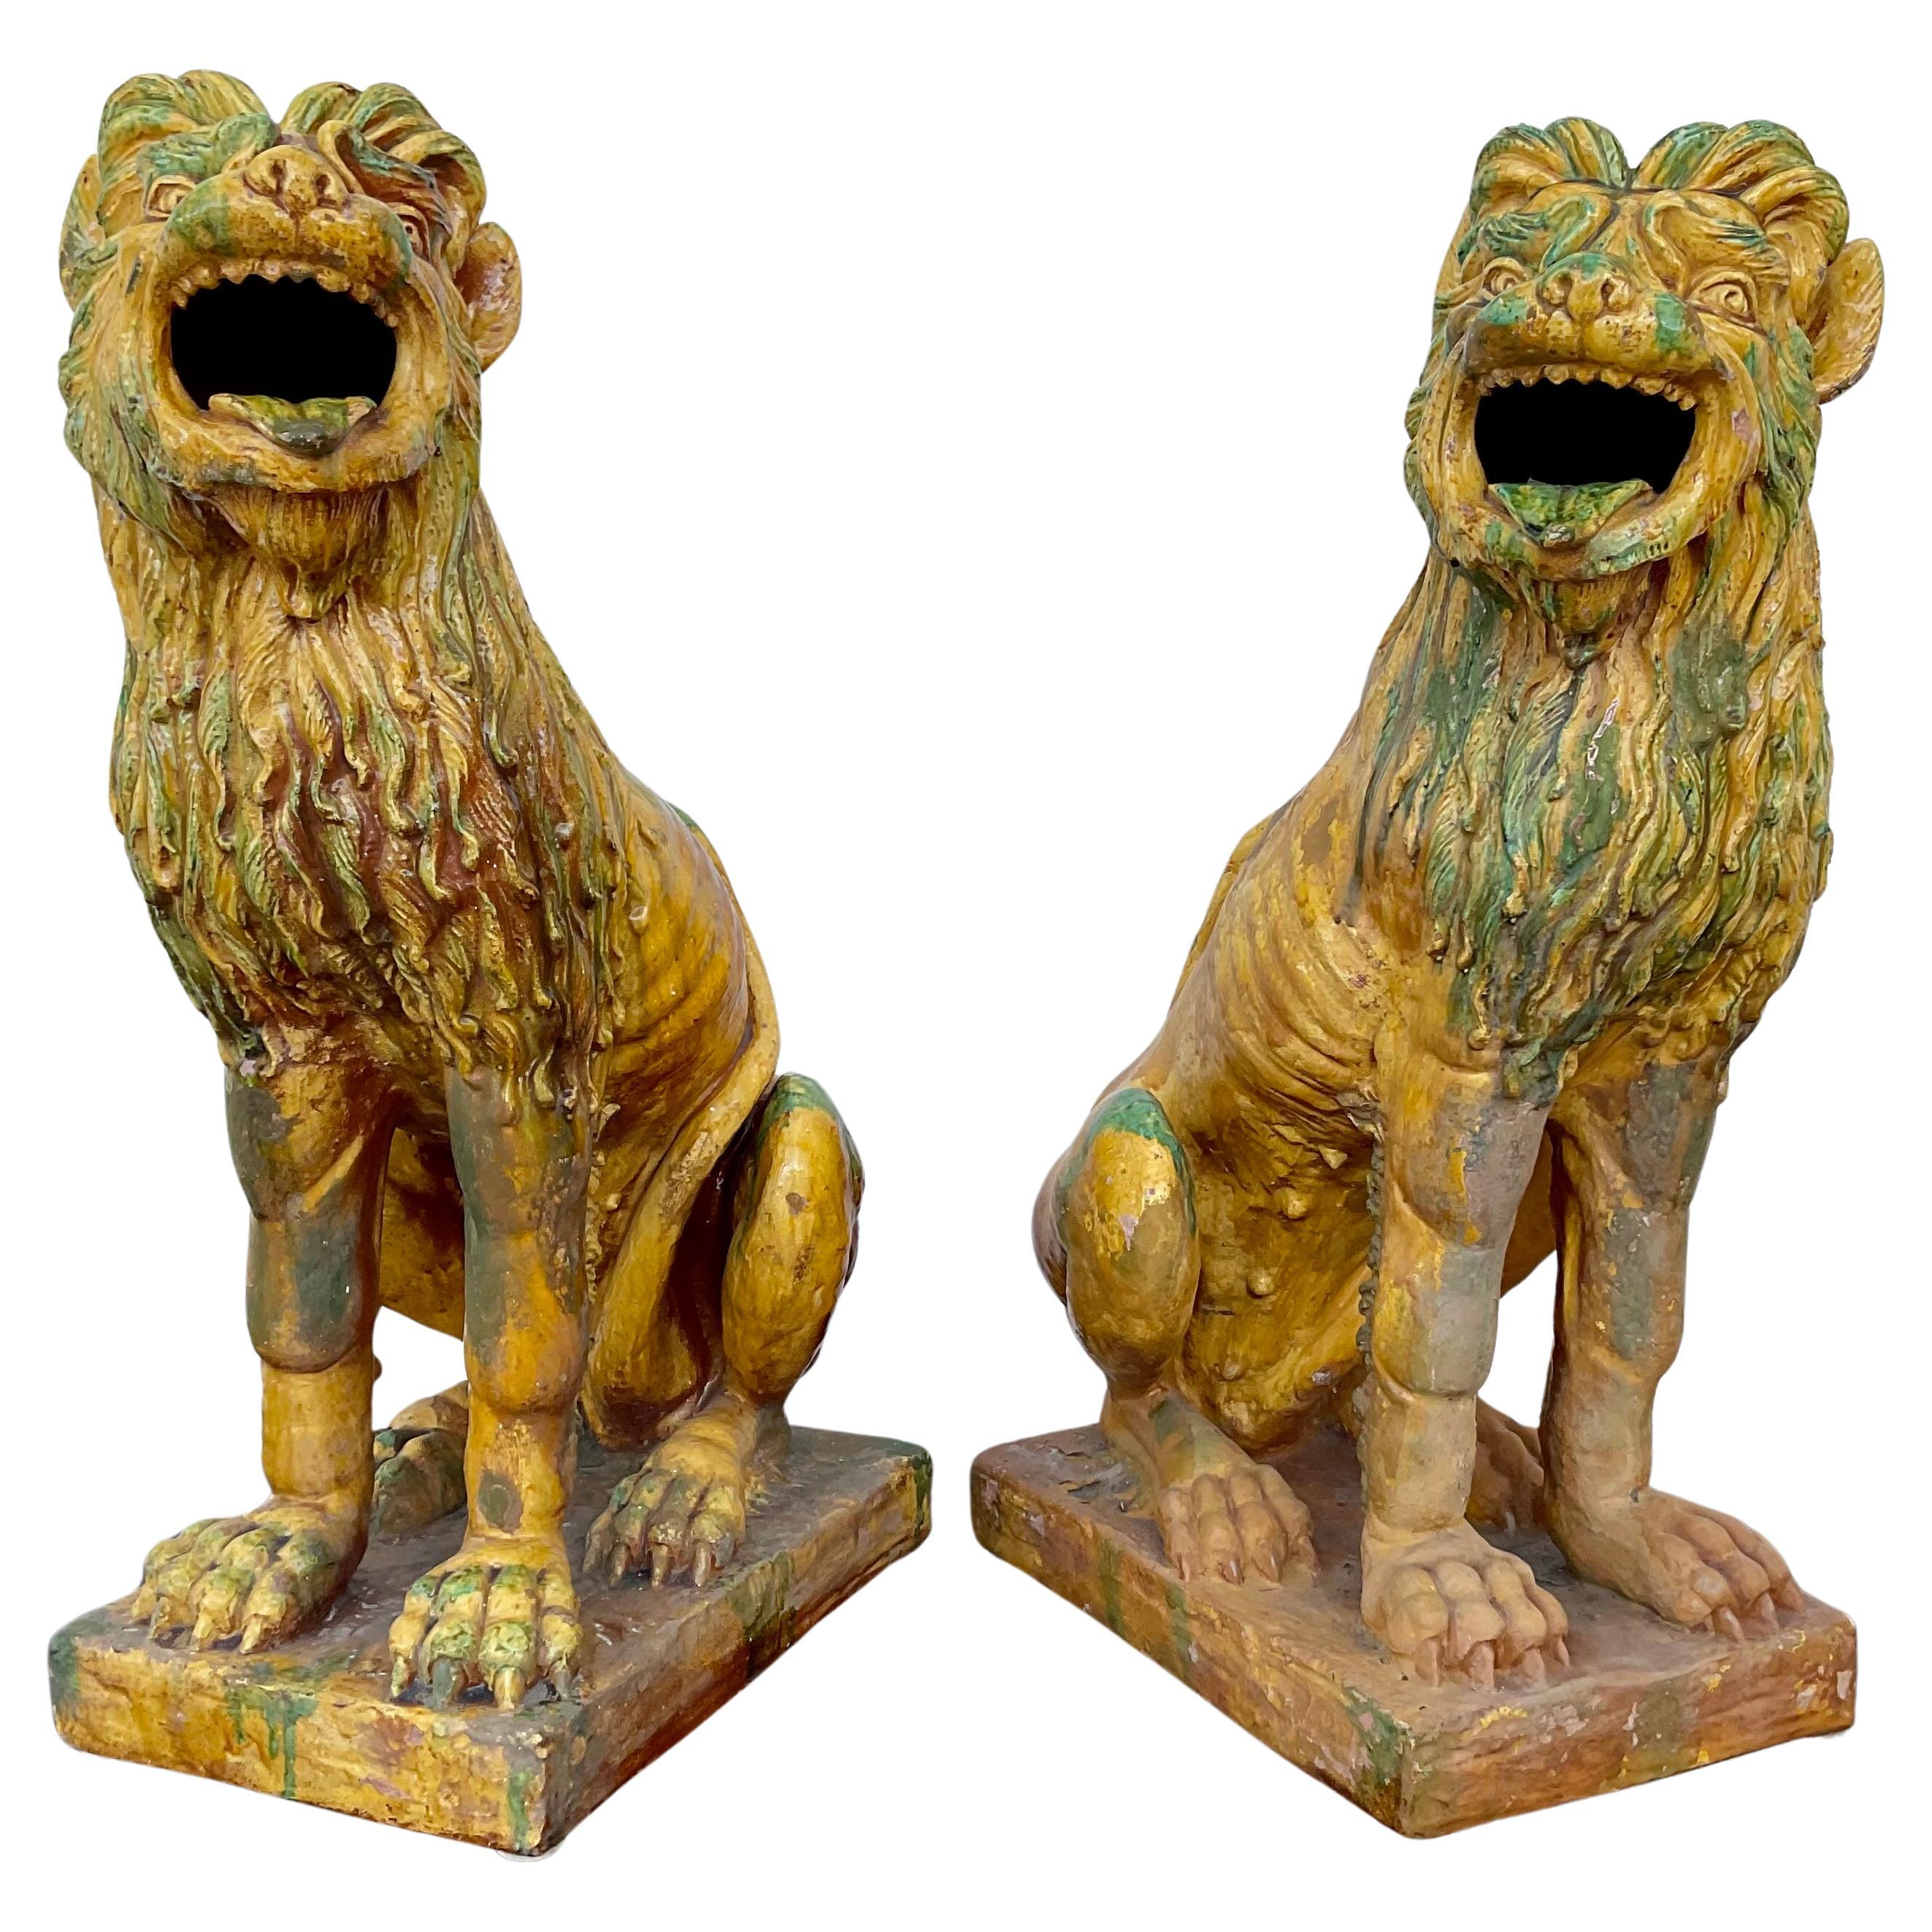 Pair of Large Glazed Terra Cotta Lions or Foo Dogs For Sale